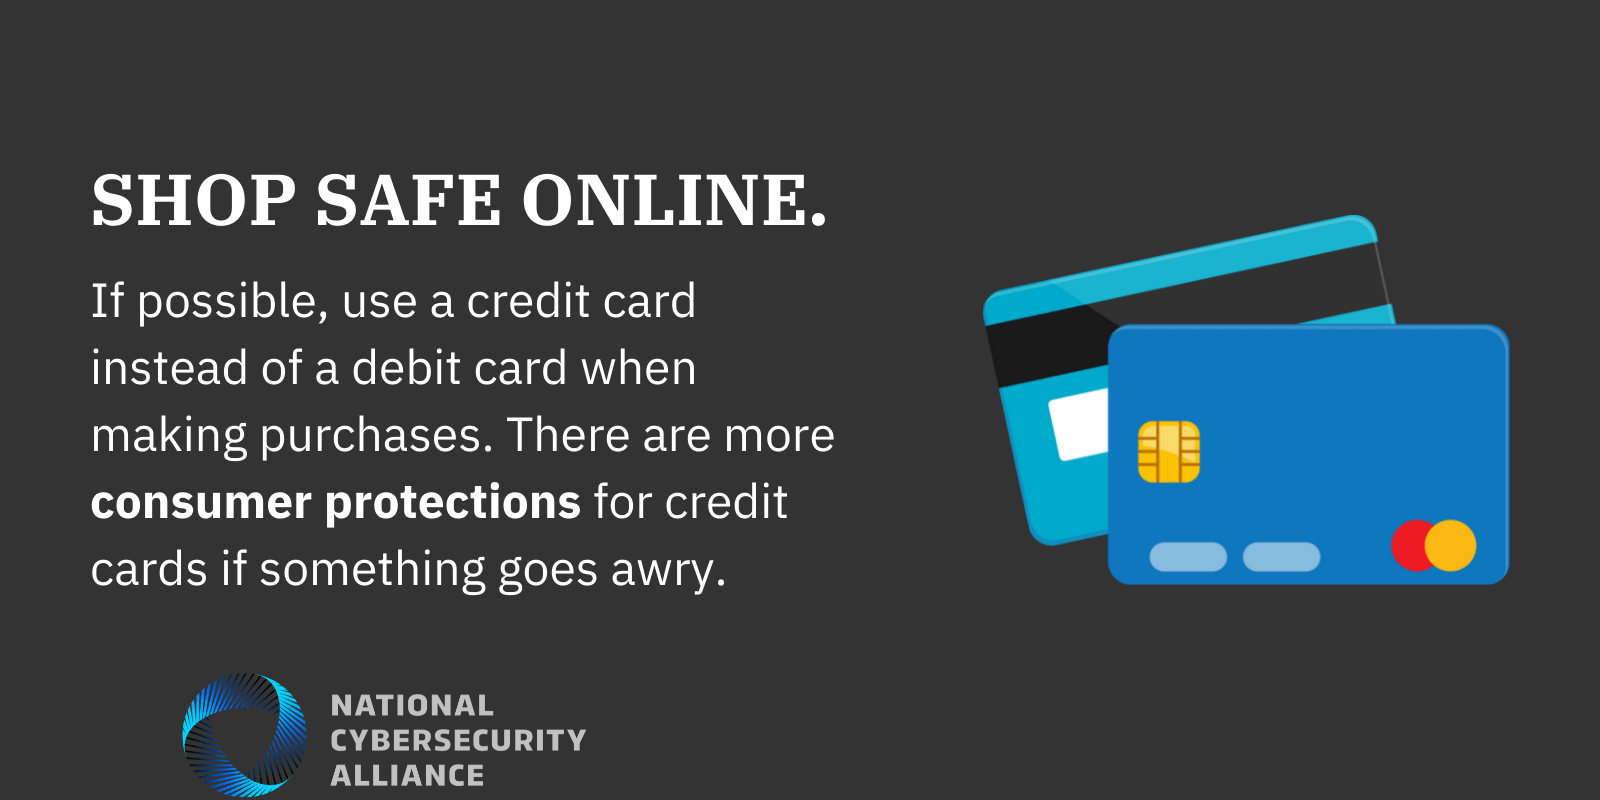 Shop safe online. If possible use a credit card instead of a debit card when making purchases. There are more consumer protections for credit cards if something goes awry.